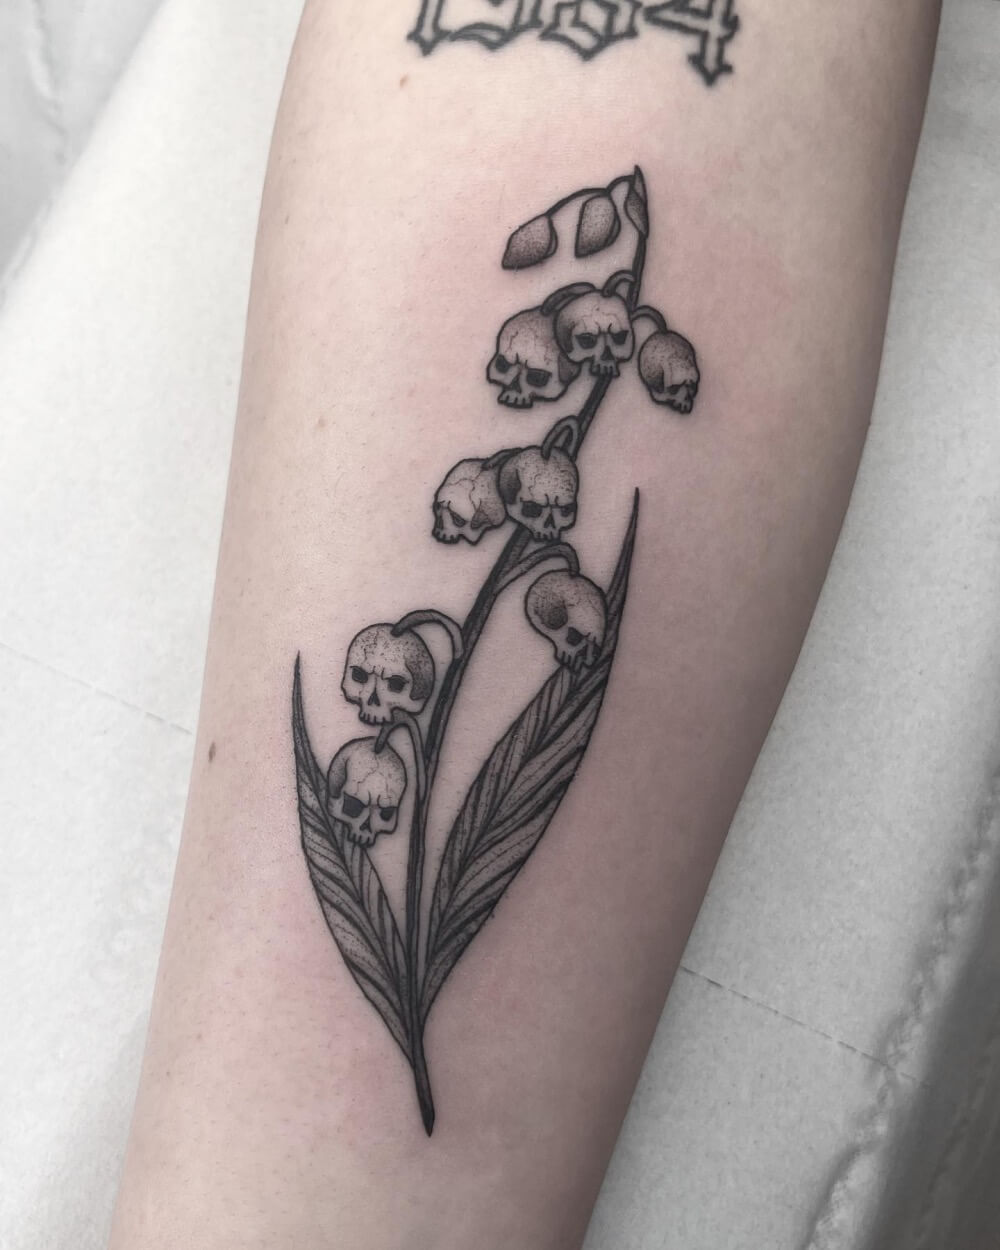 Lily of the Valley Skull Tattoo